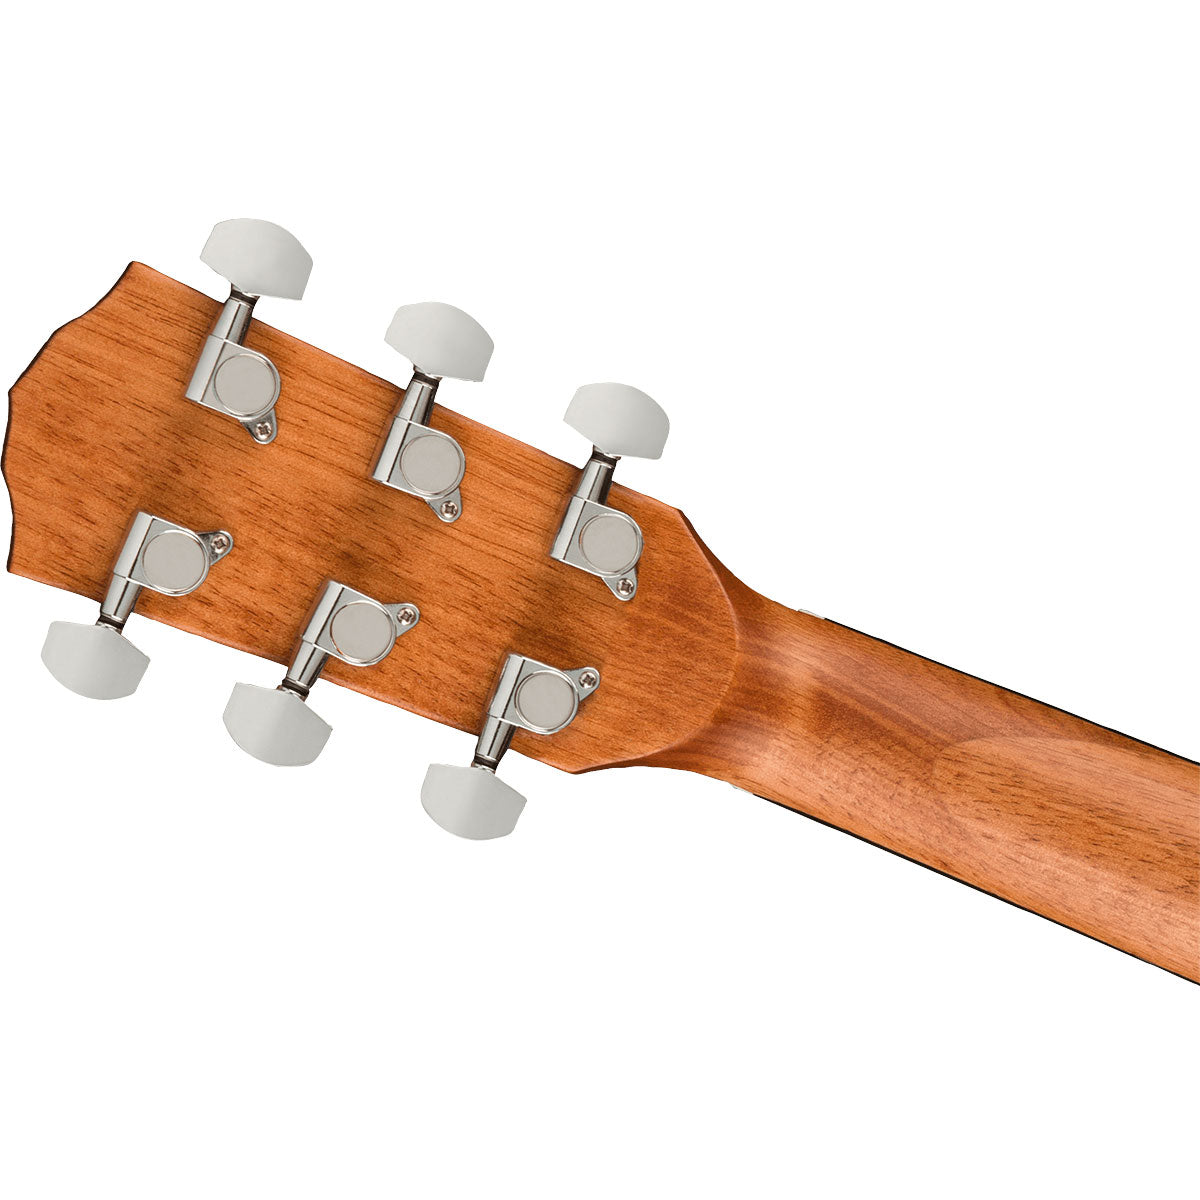 Detail view of Fender FA-15 3/4 Steel Acoustic Guitar - Moonlight showing back of headstock